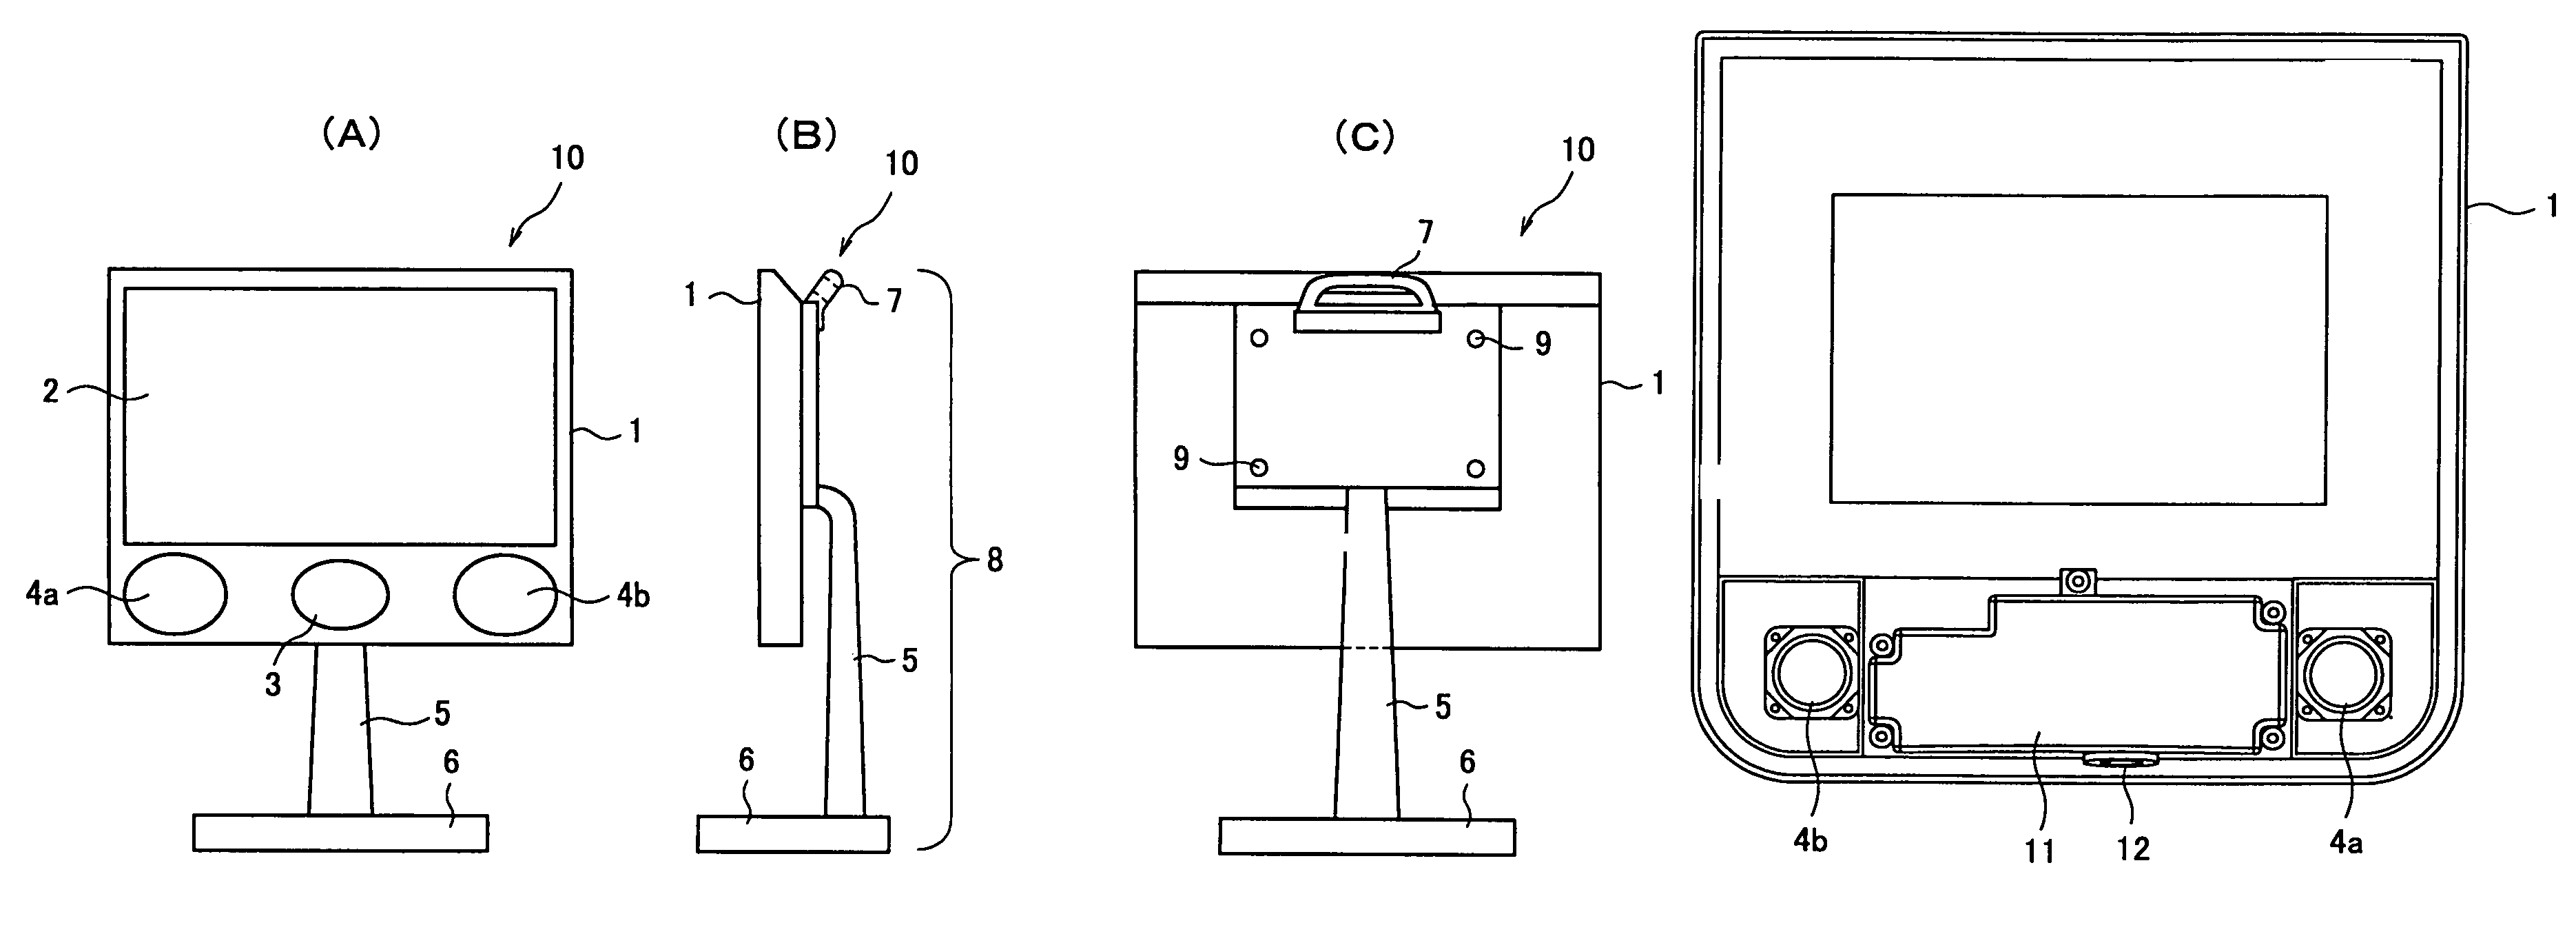 Image display device with built-in loudspeakers